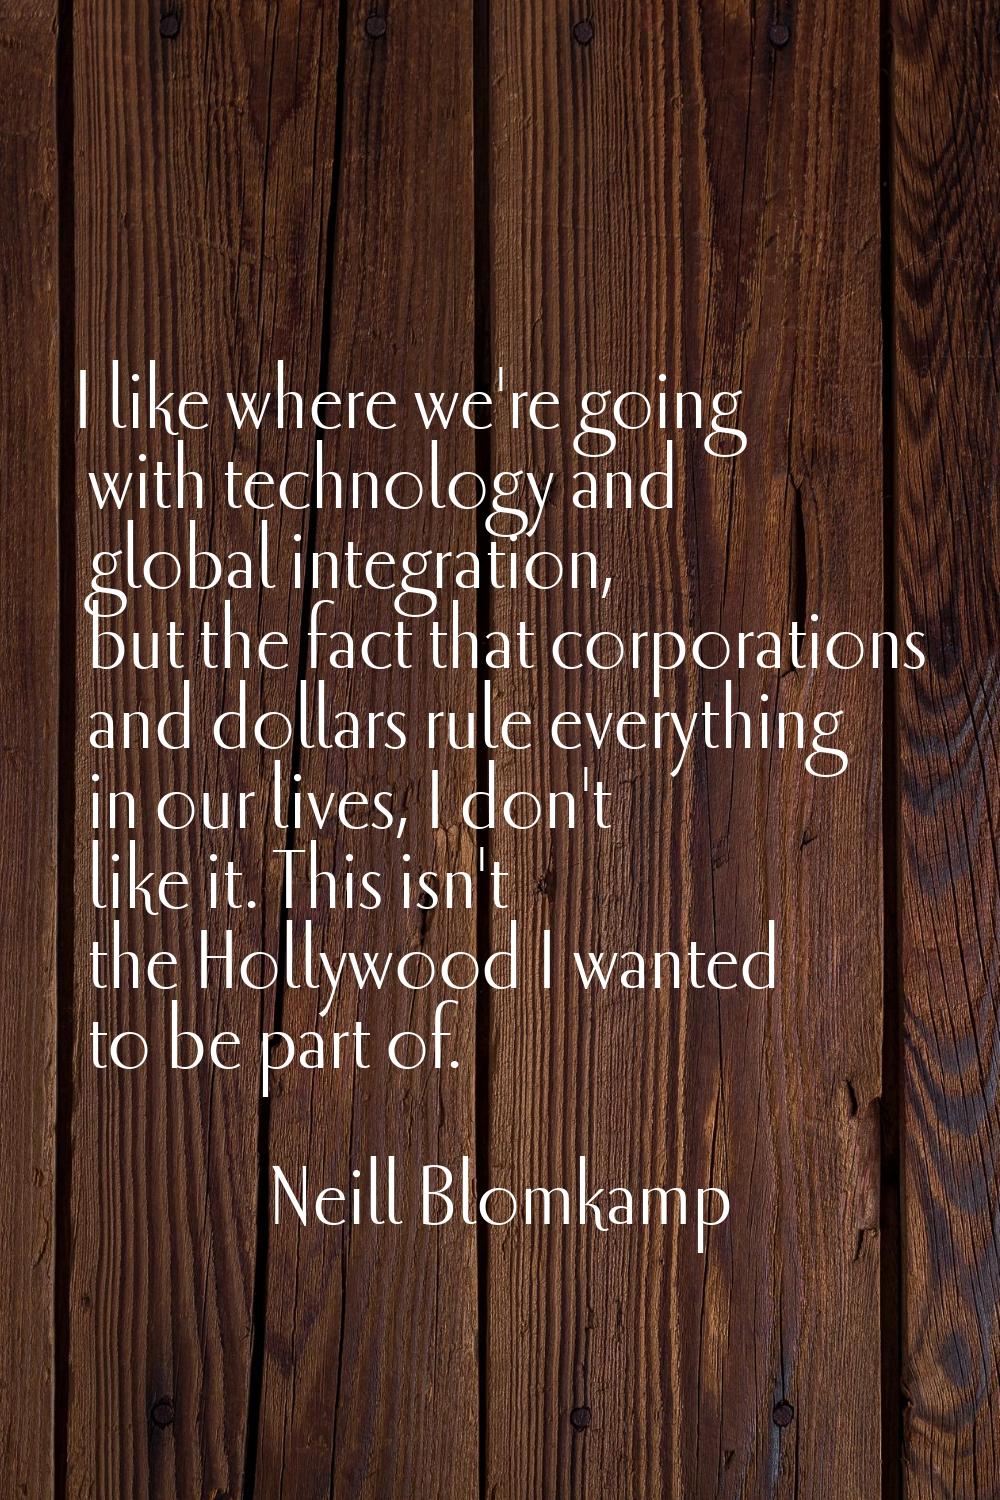 I like where we're going with technology and global integration, but the fact that corporations and